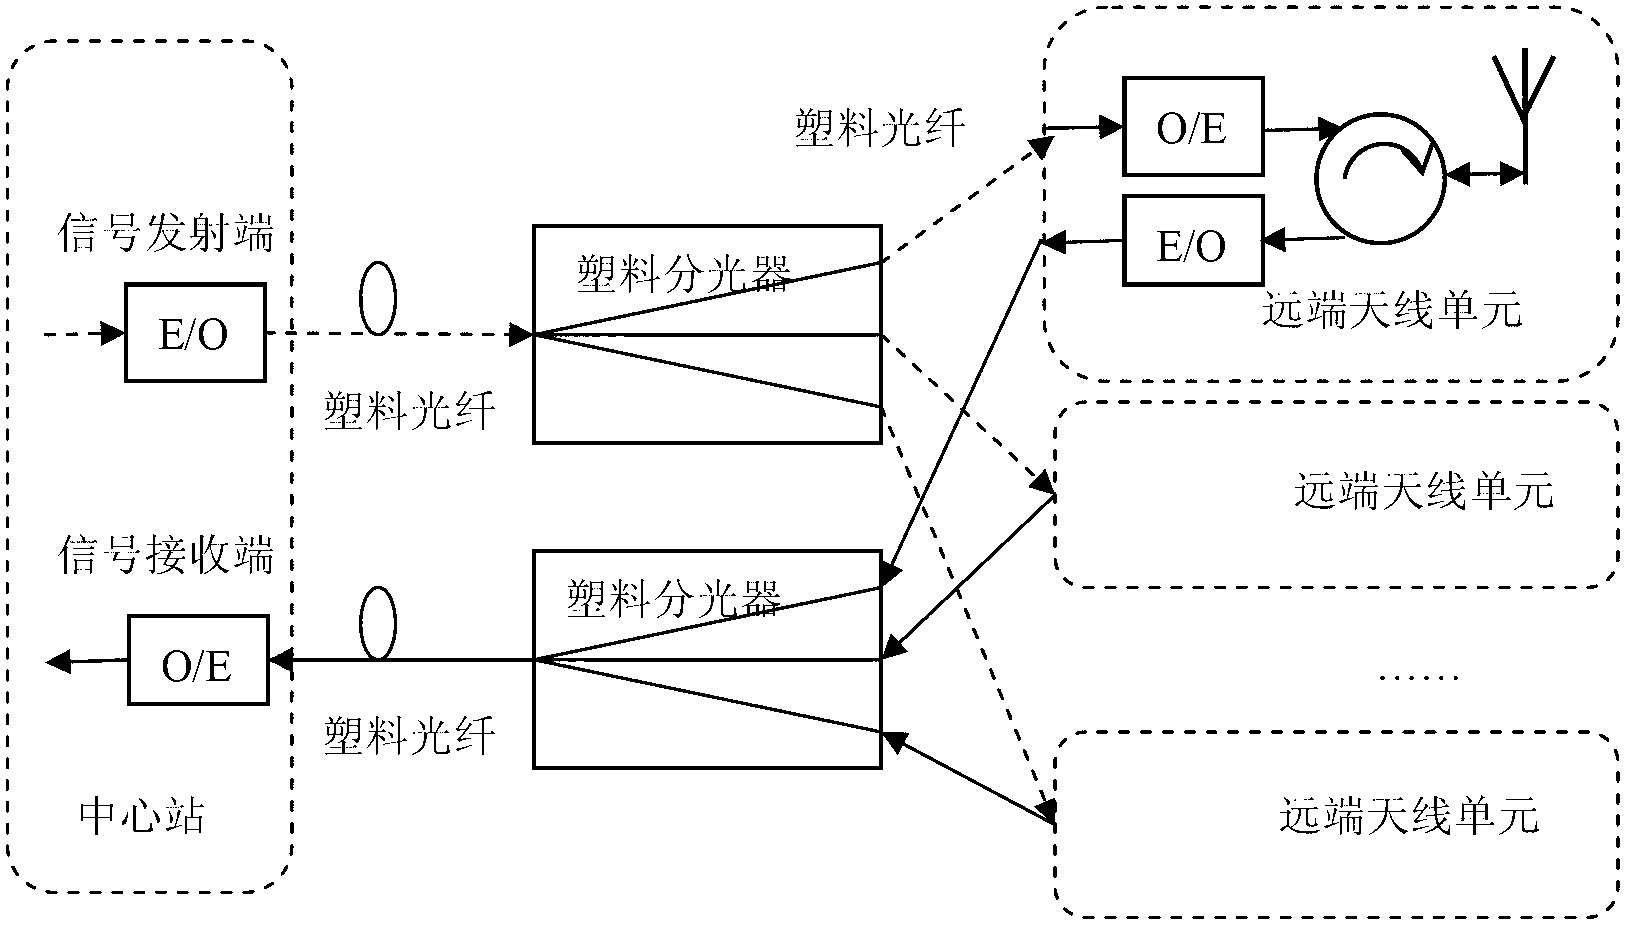 All-plastic optical fiber radio broadcast communication system and implementation method thereof